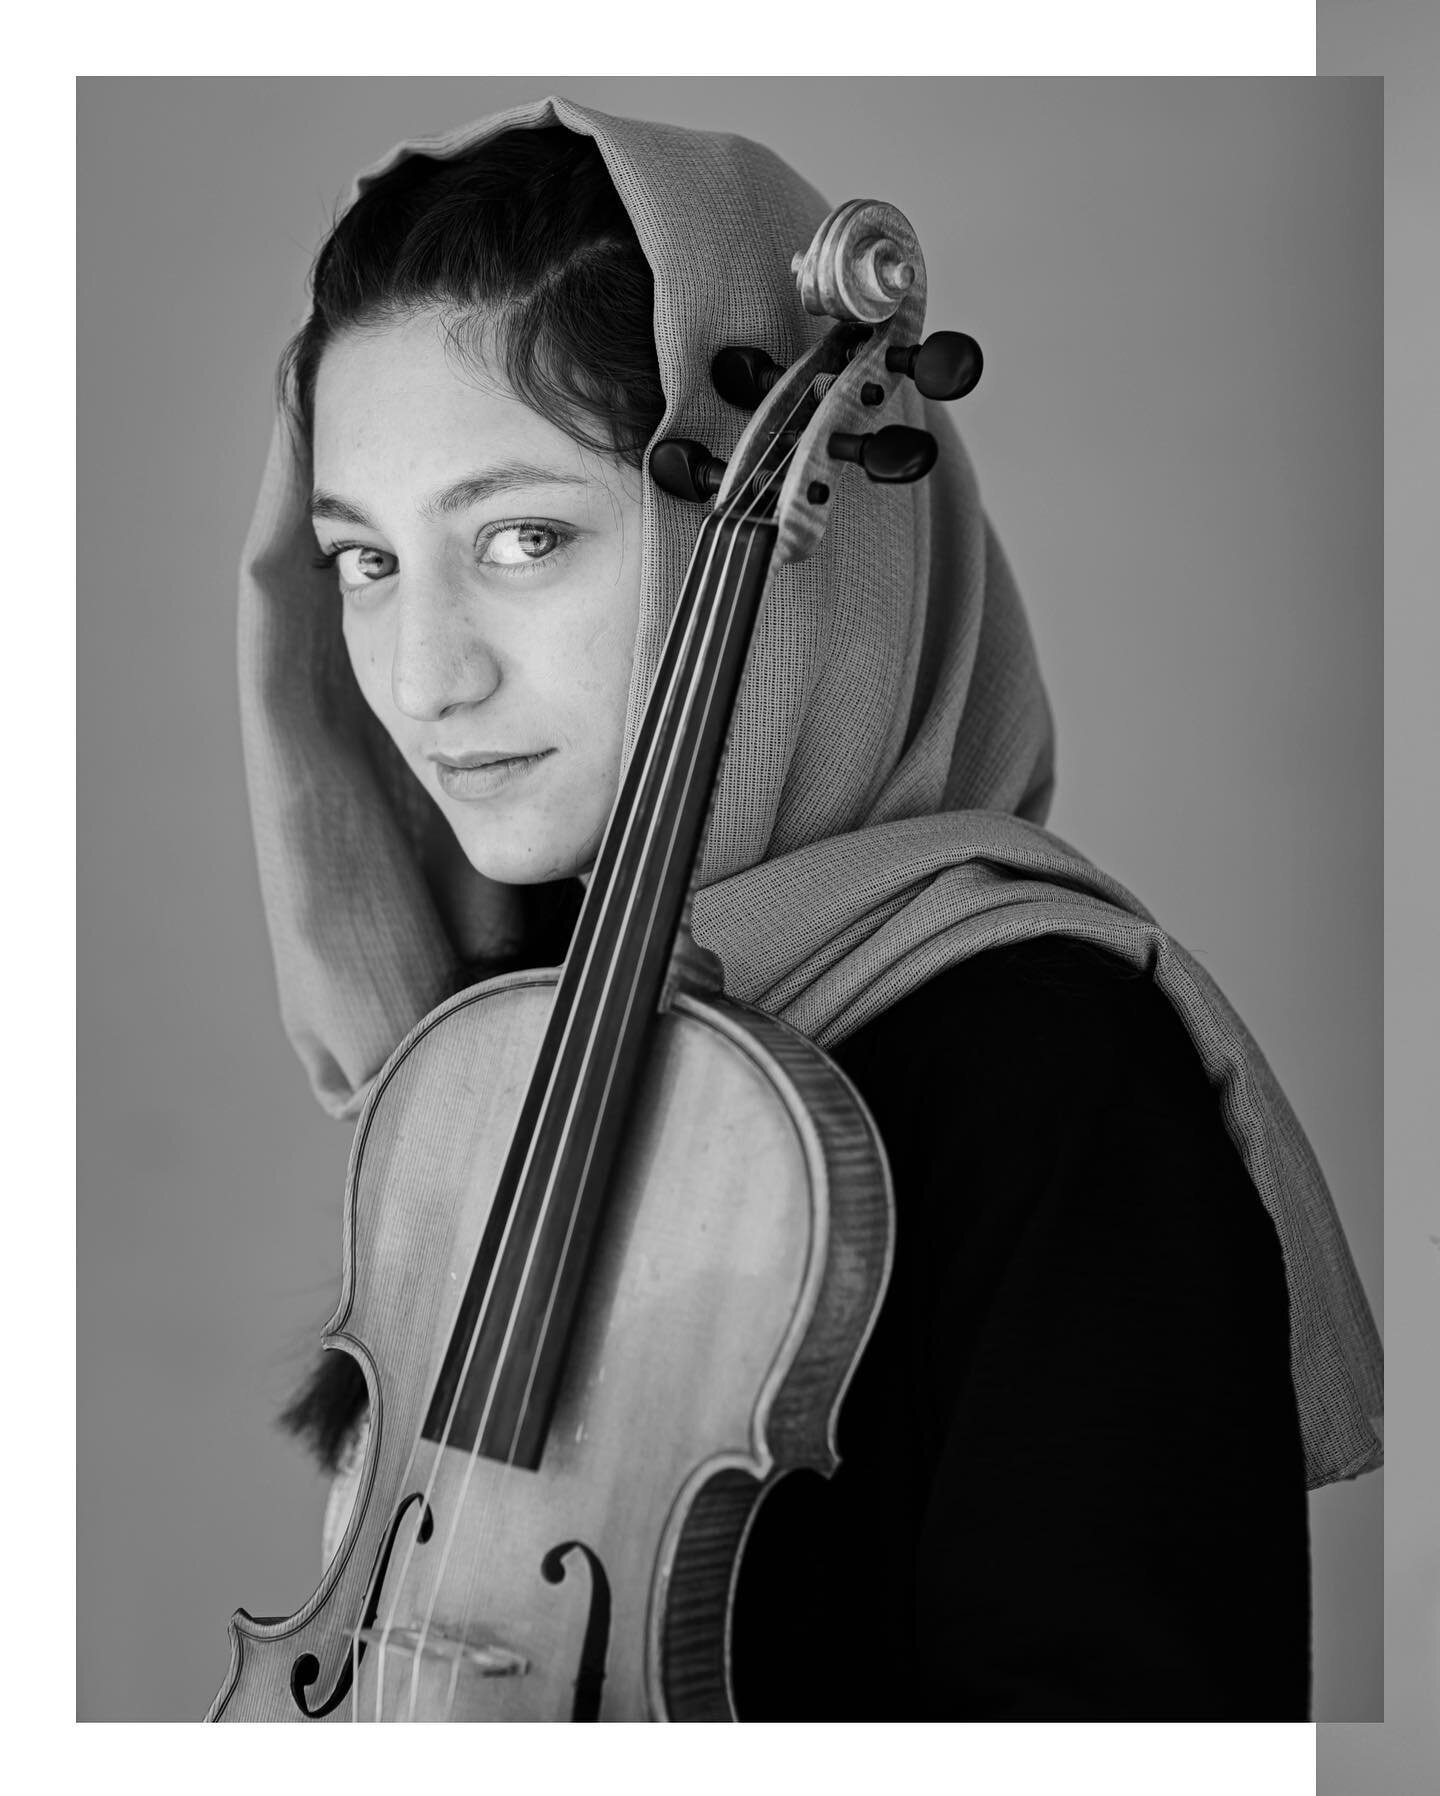 Zohra No.2: For this world-renowned music school in Afghanistan, everything seemed so much different three months before the Taliban&rsquo;s shockingly easy blitz into Kabul.⁣
⁣
At the institute's compound now in Kabul, no teachers or students sit an